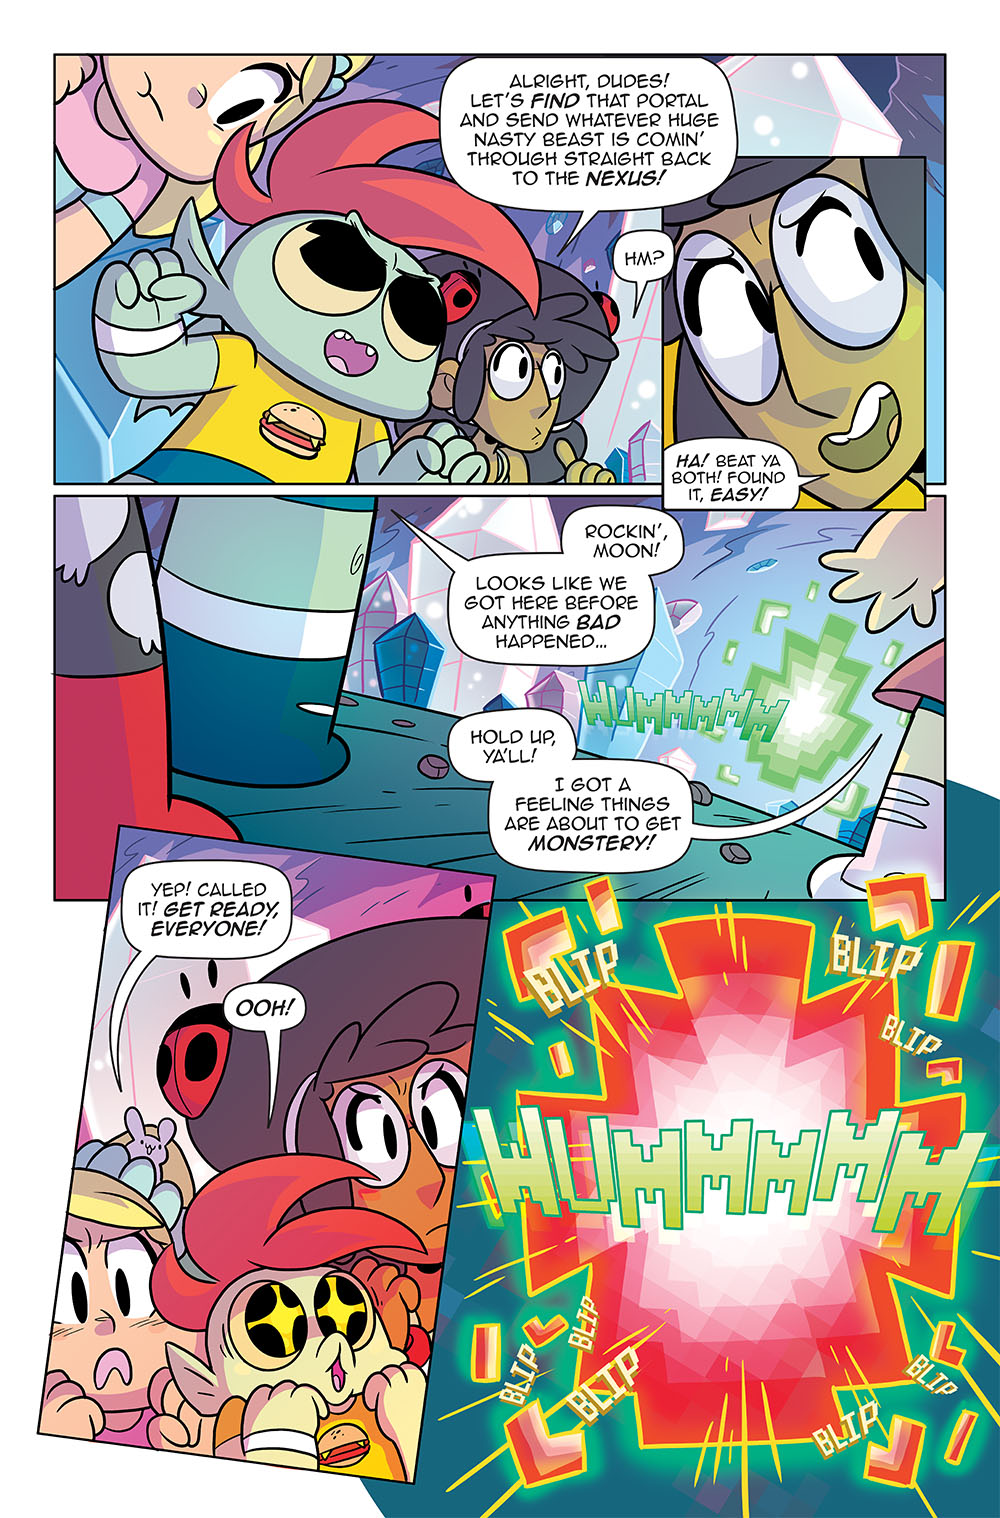 Read The Wacky, Hilarious First Issue Of Welcome To Showside Here For Free